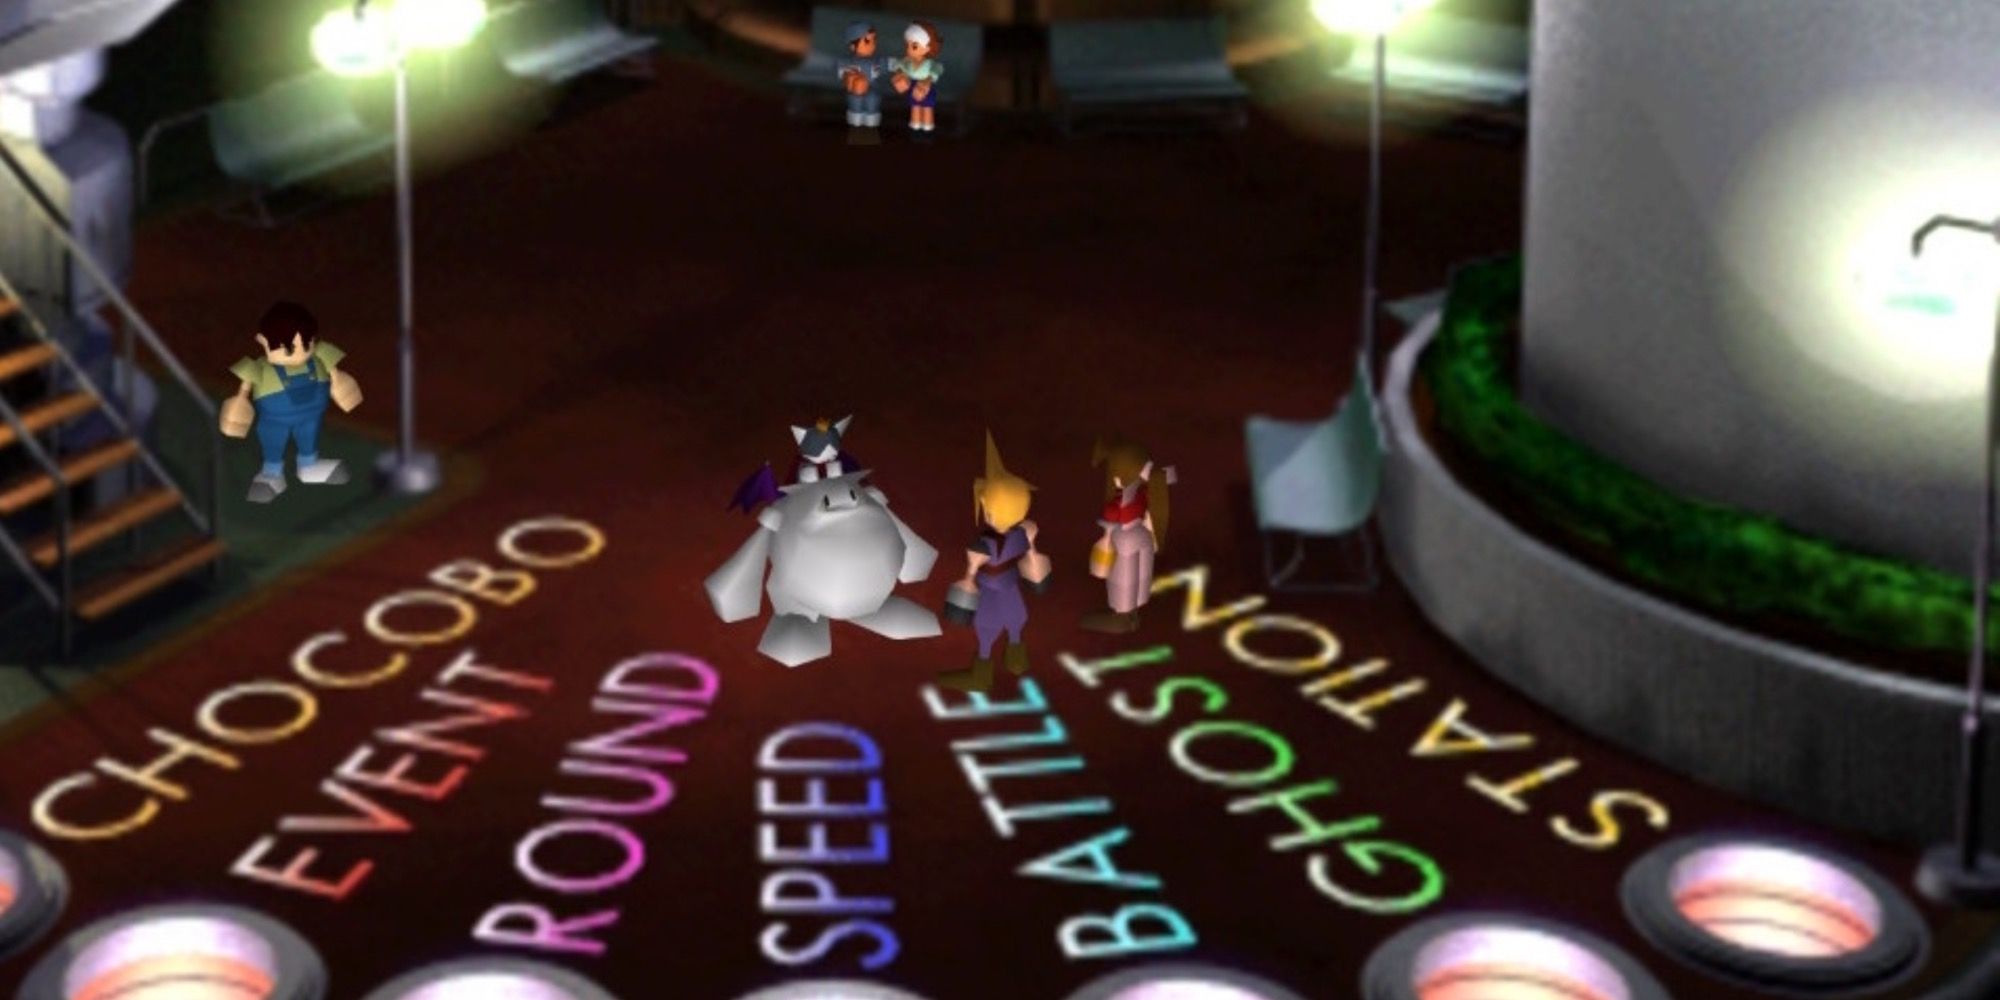 Cait Sith talking to Cloud and Aerith in Final Fantasy 7